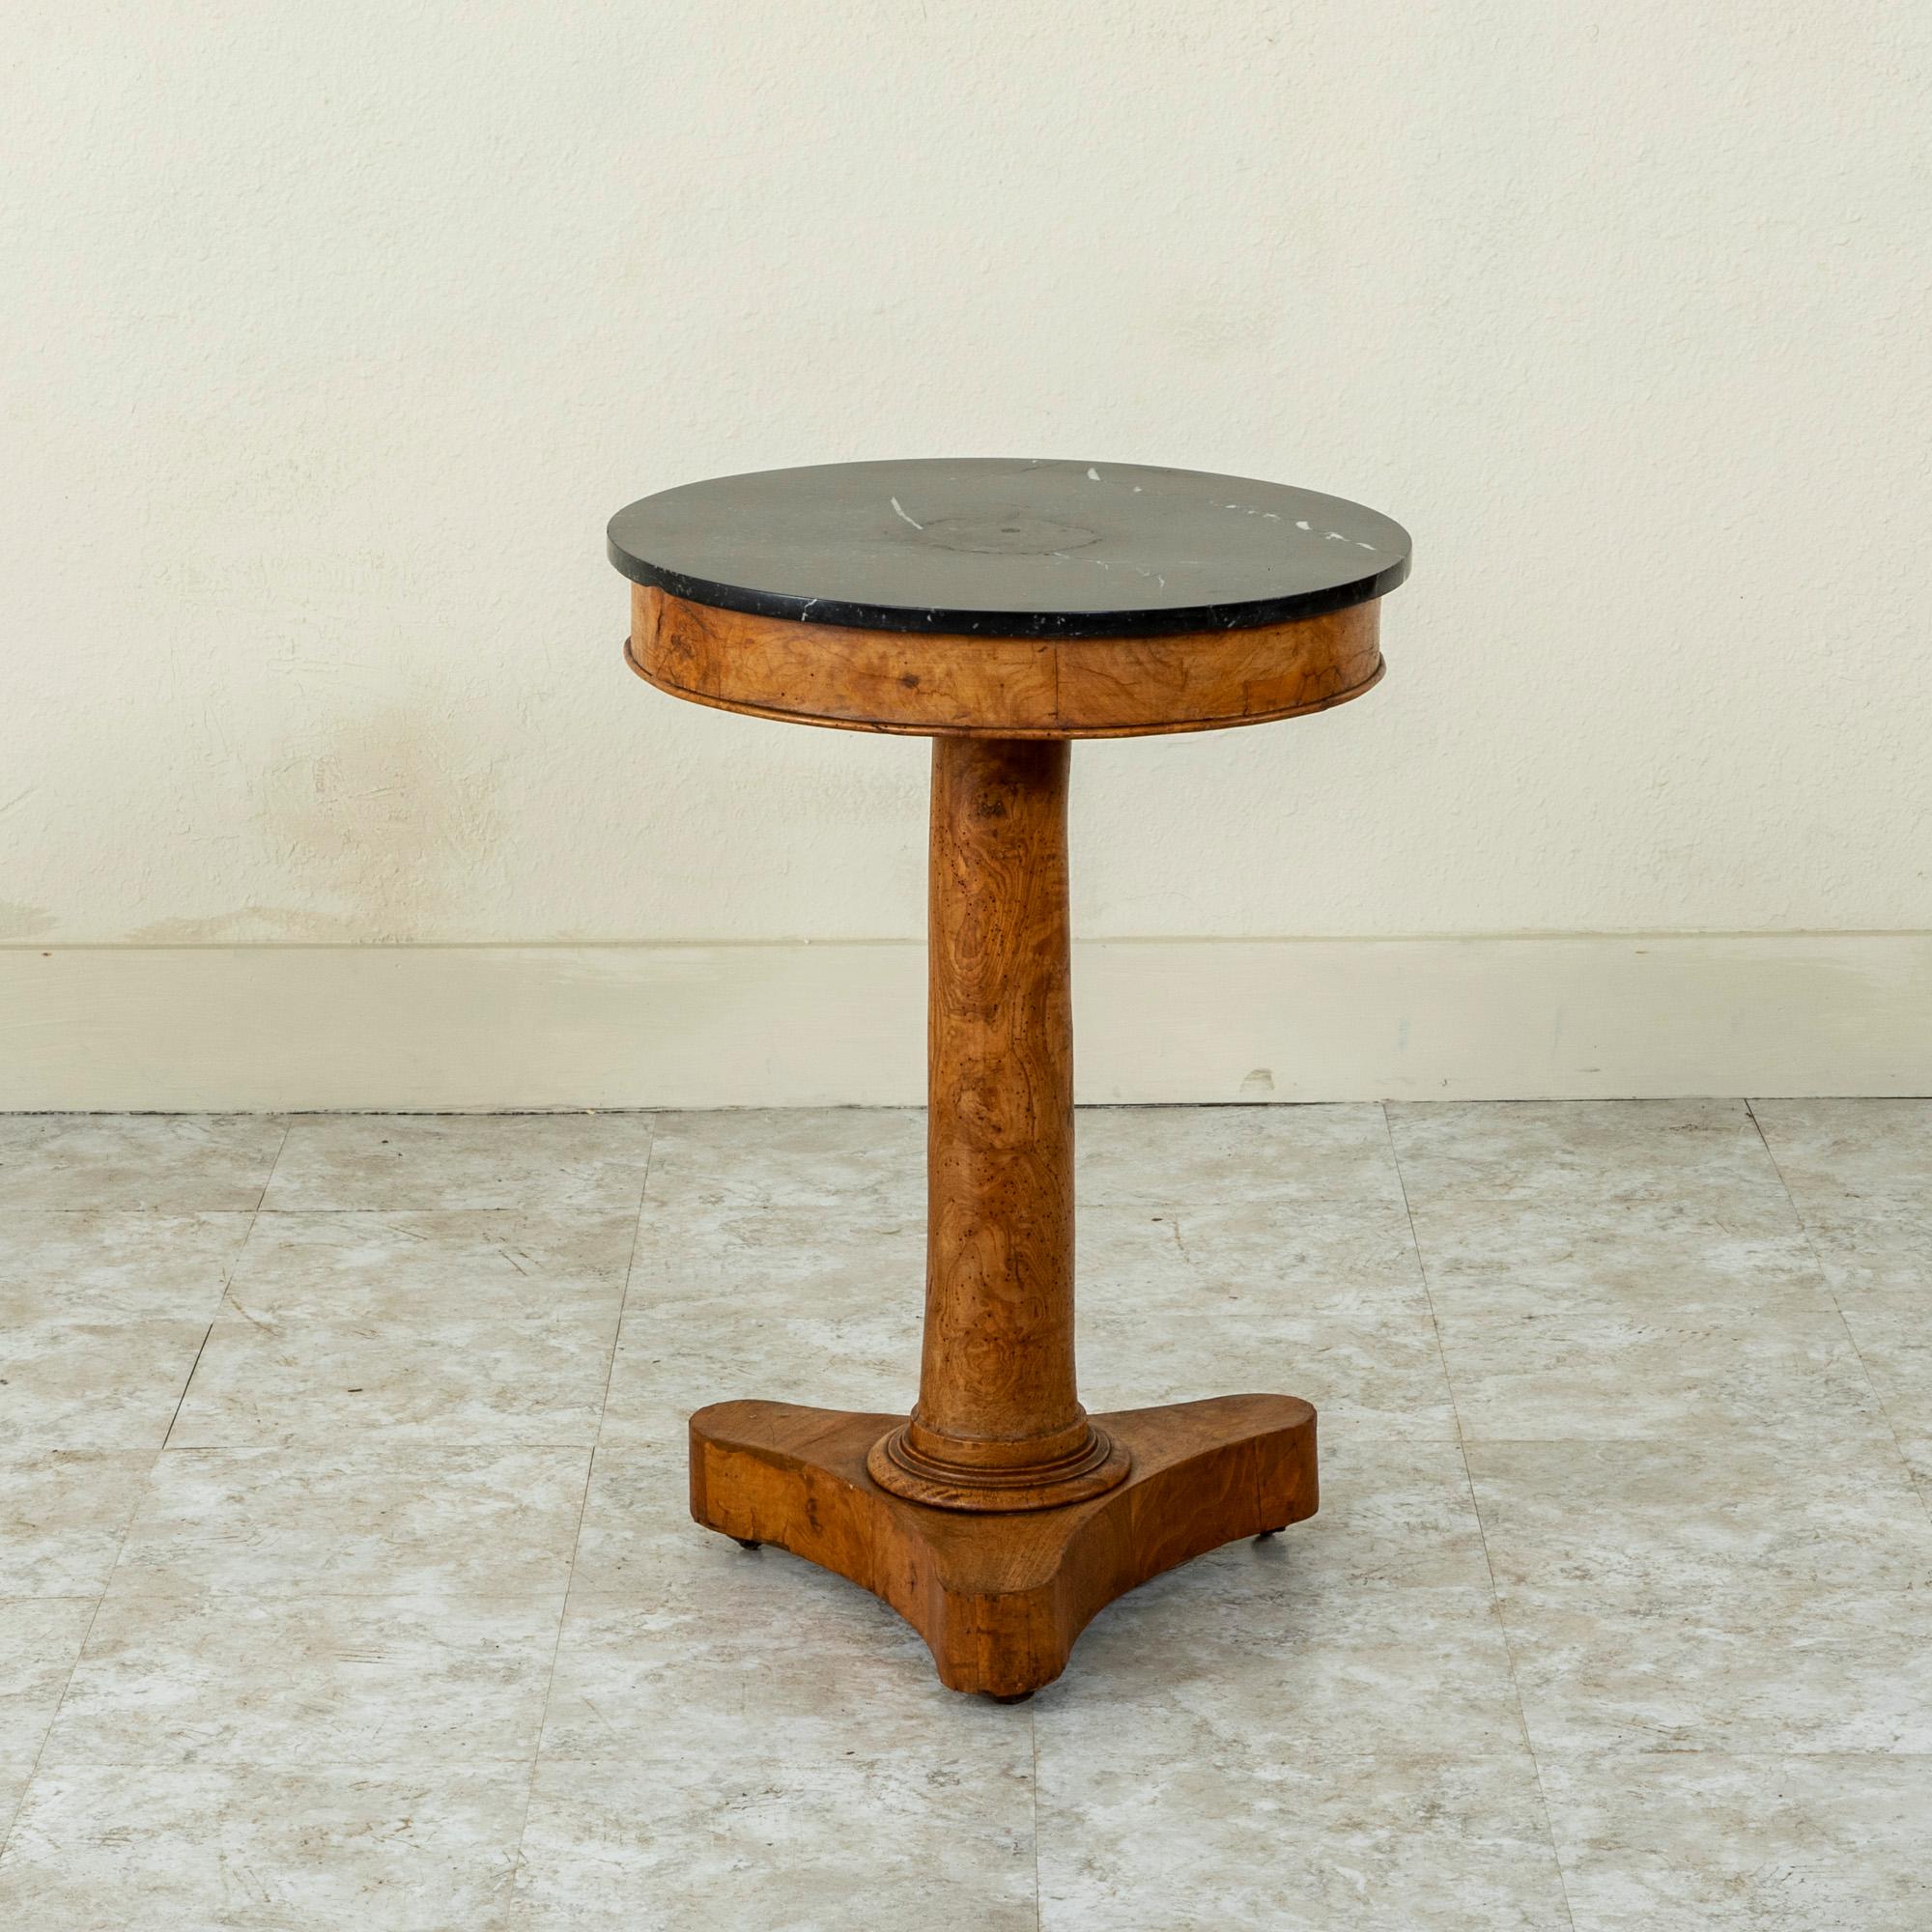 Hand-Carved Early 19th Century French Empire Period Burl Walnut Gueridon or Pedestal Table